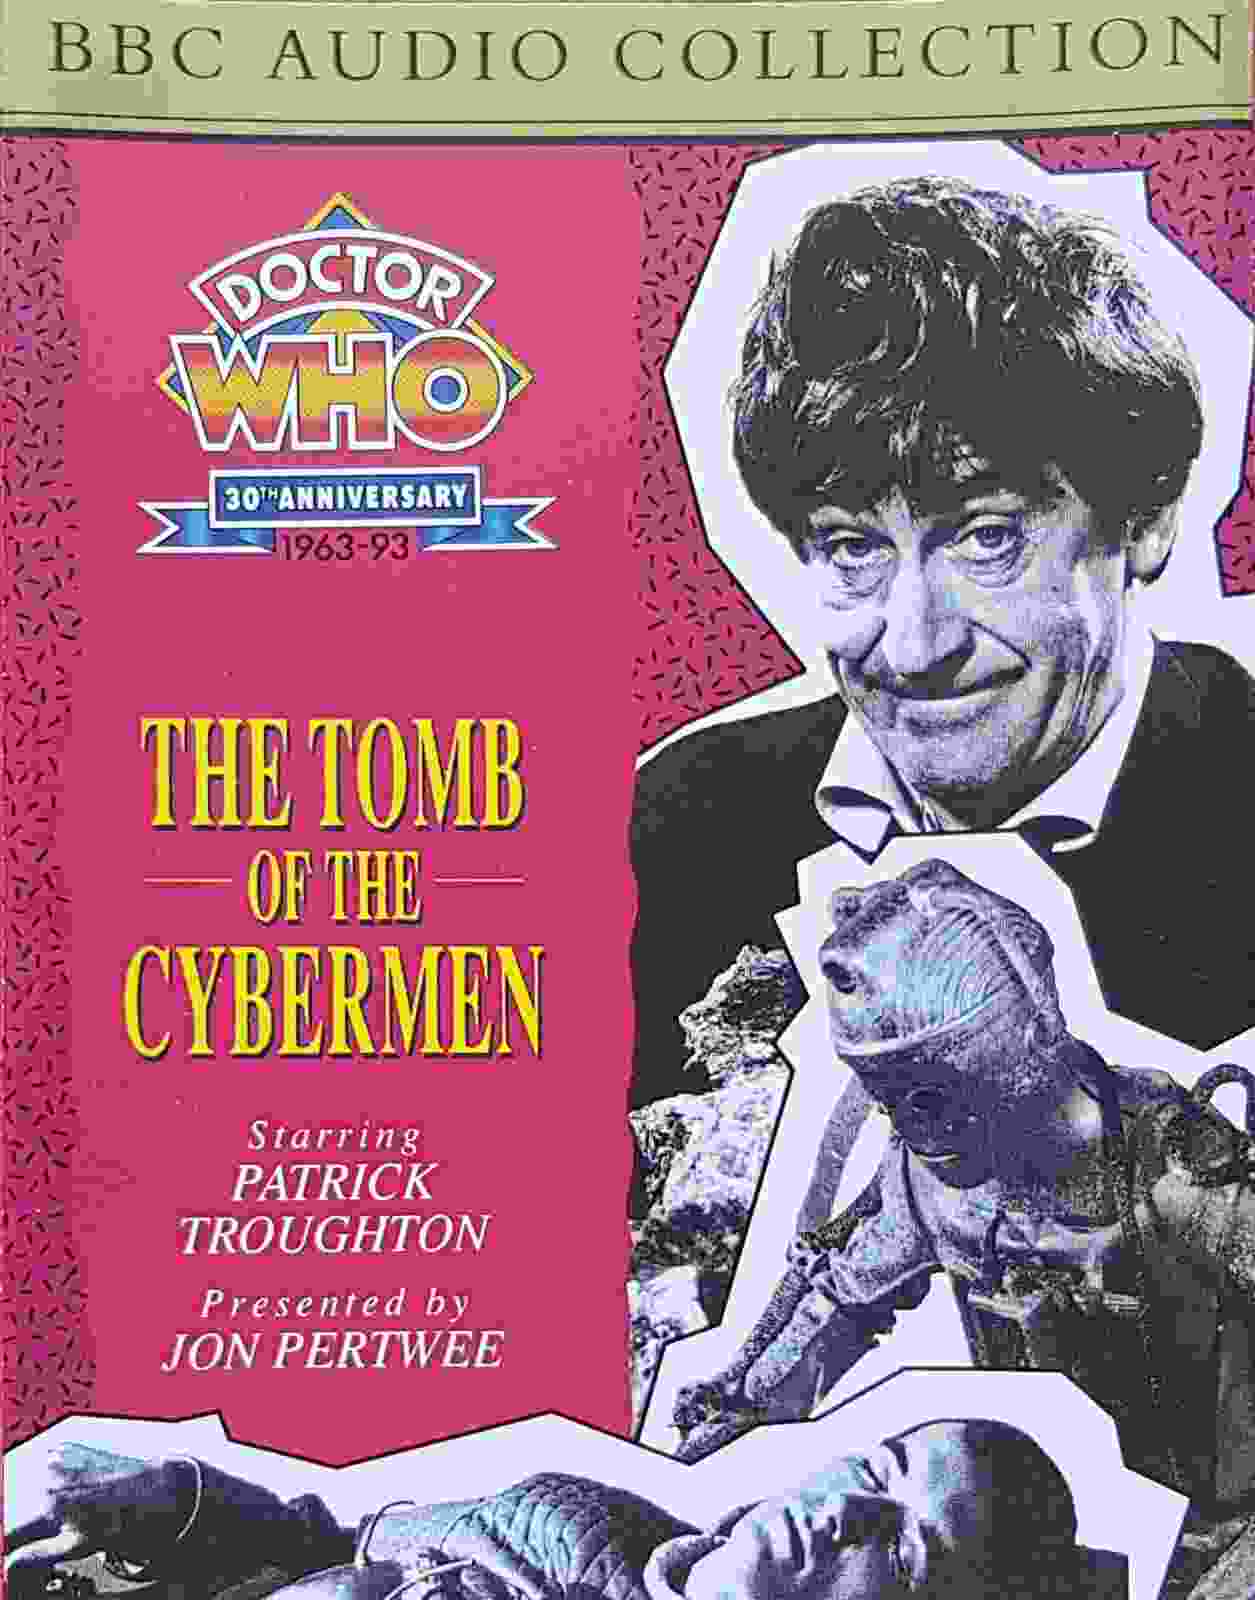 Picture of ZBBC 1343 Doctor Who - The tomb of the Cybermen by artist Kit Peddler / Gerry Davis from the BBC cassettes - Records and Tapes library